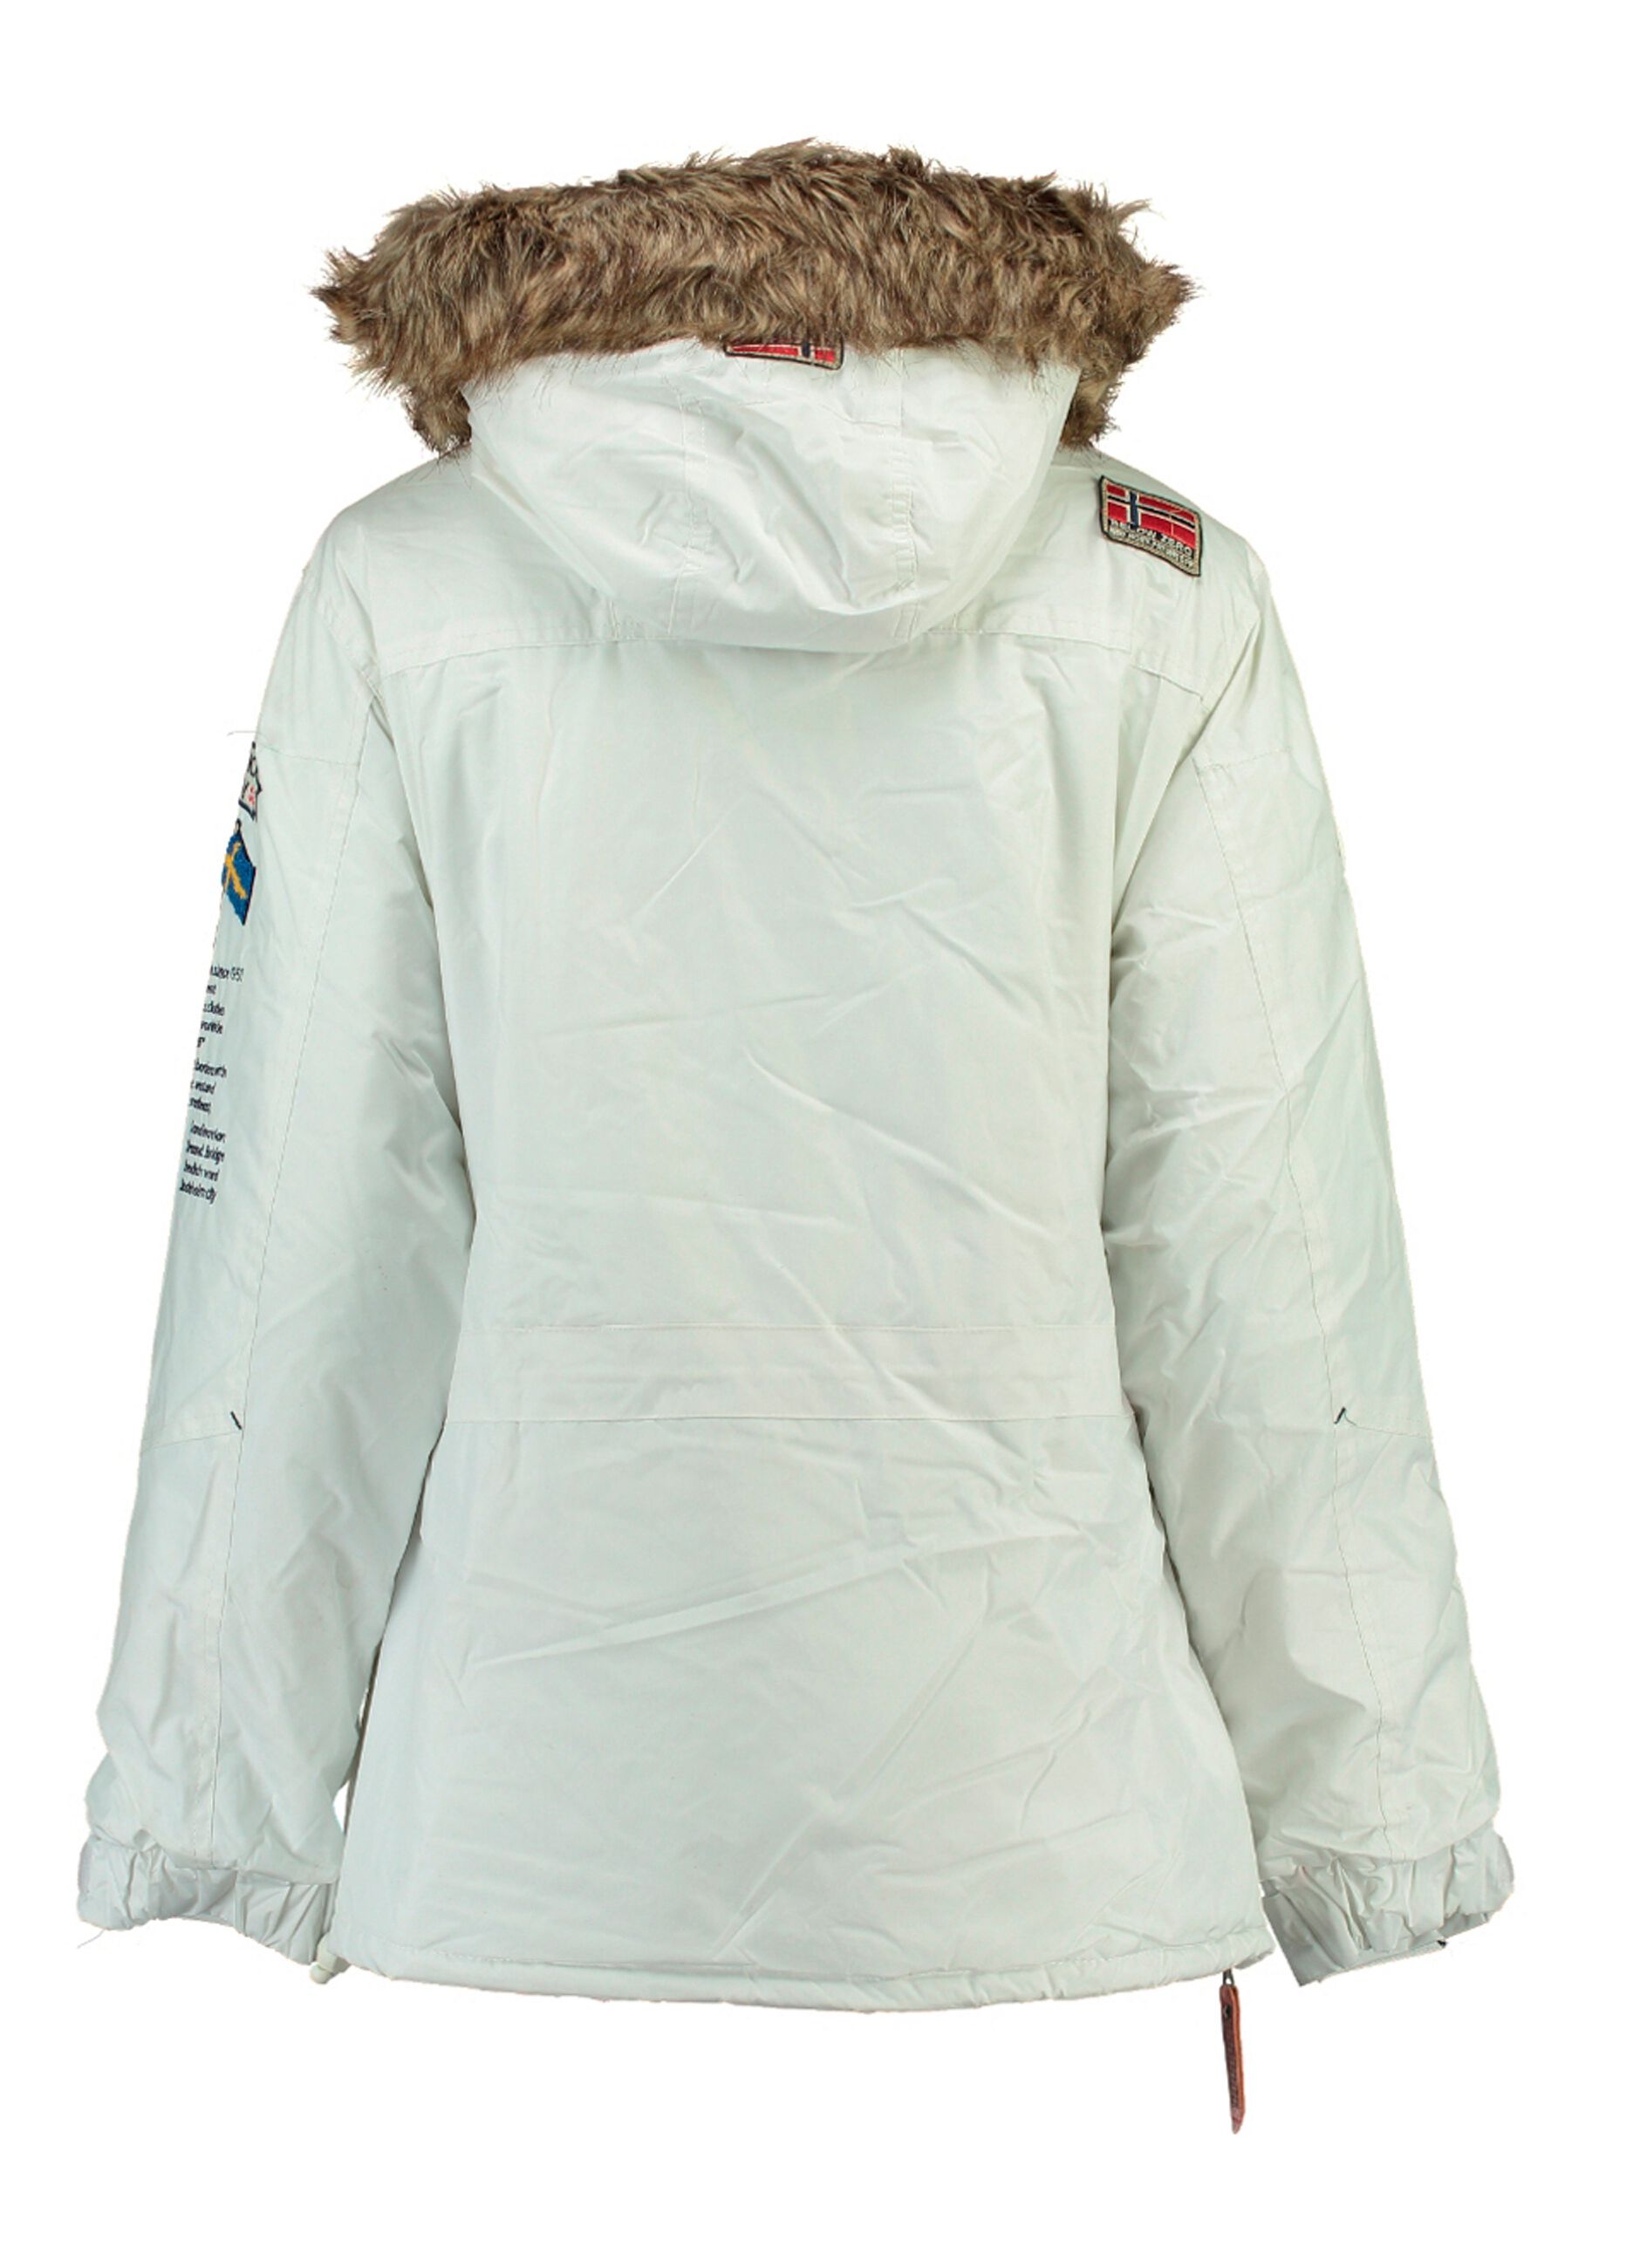 Geographical Norway padded parka with hood